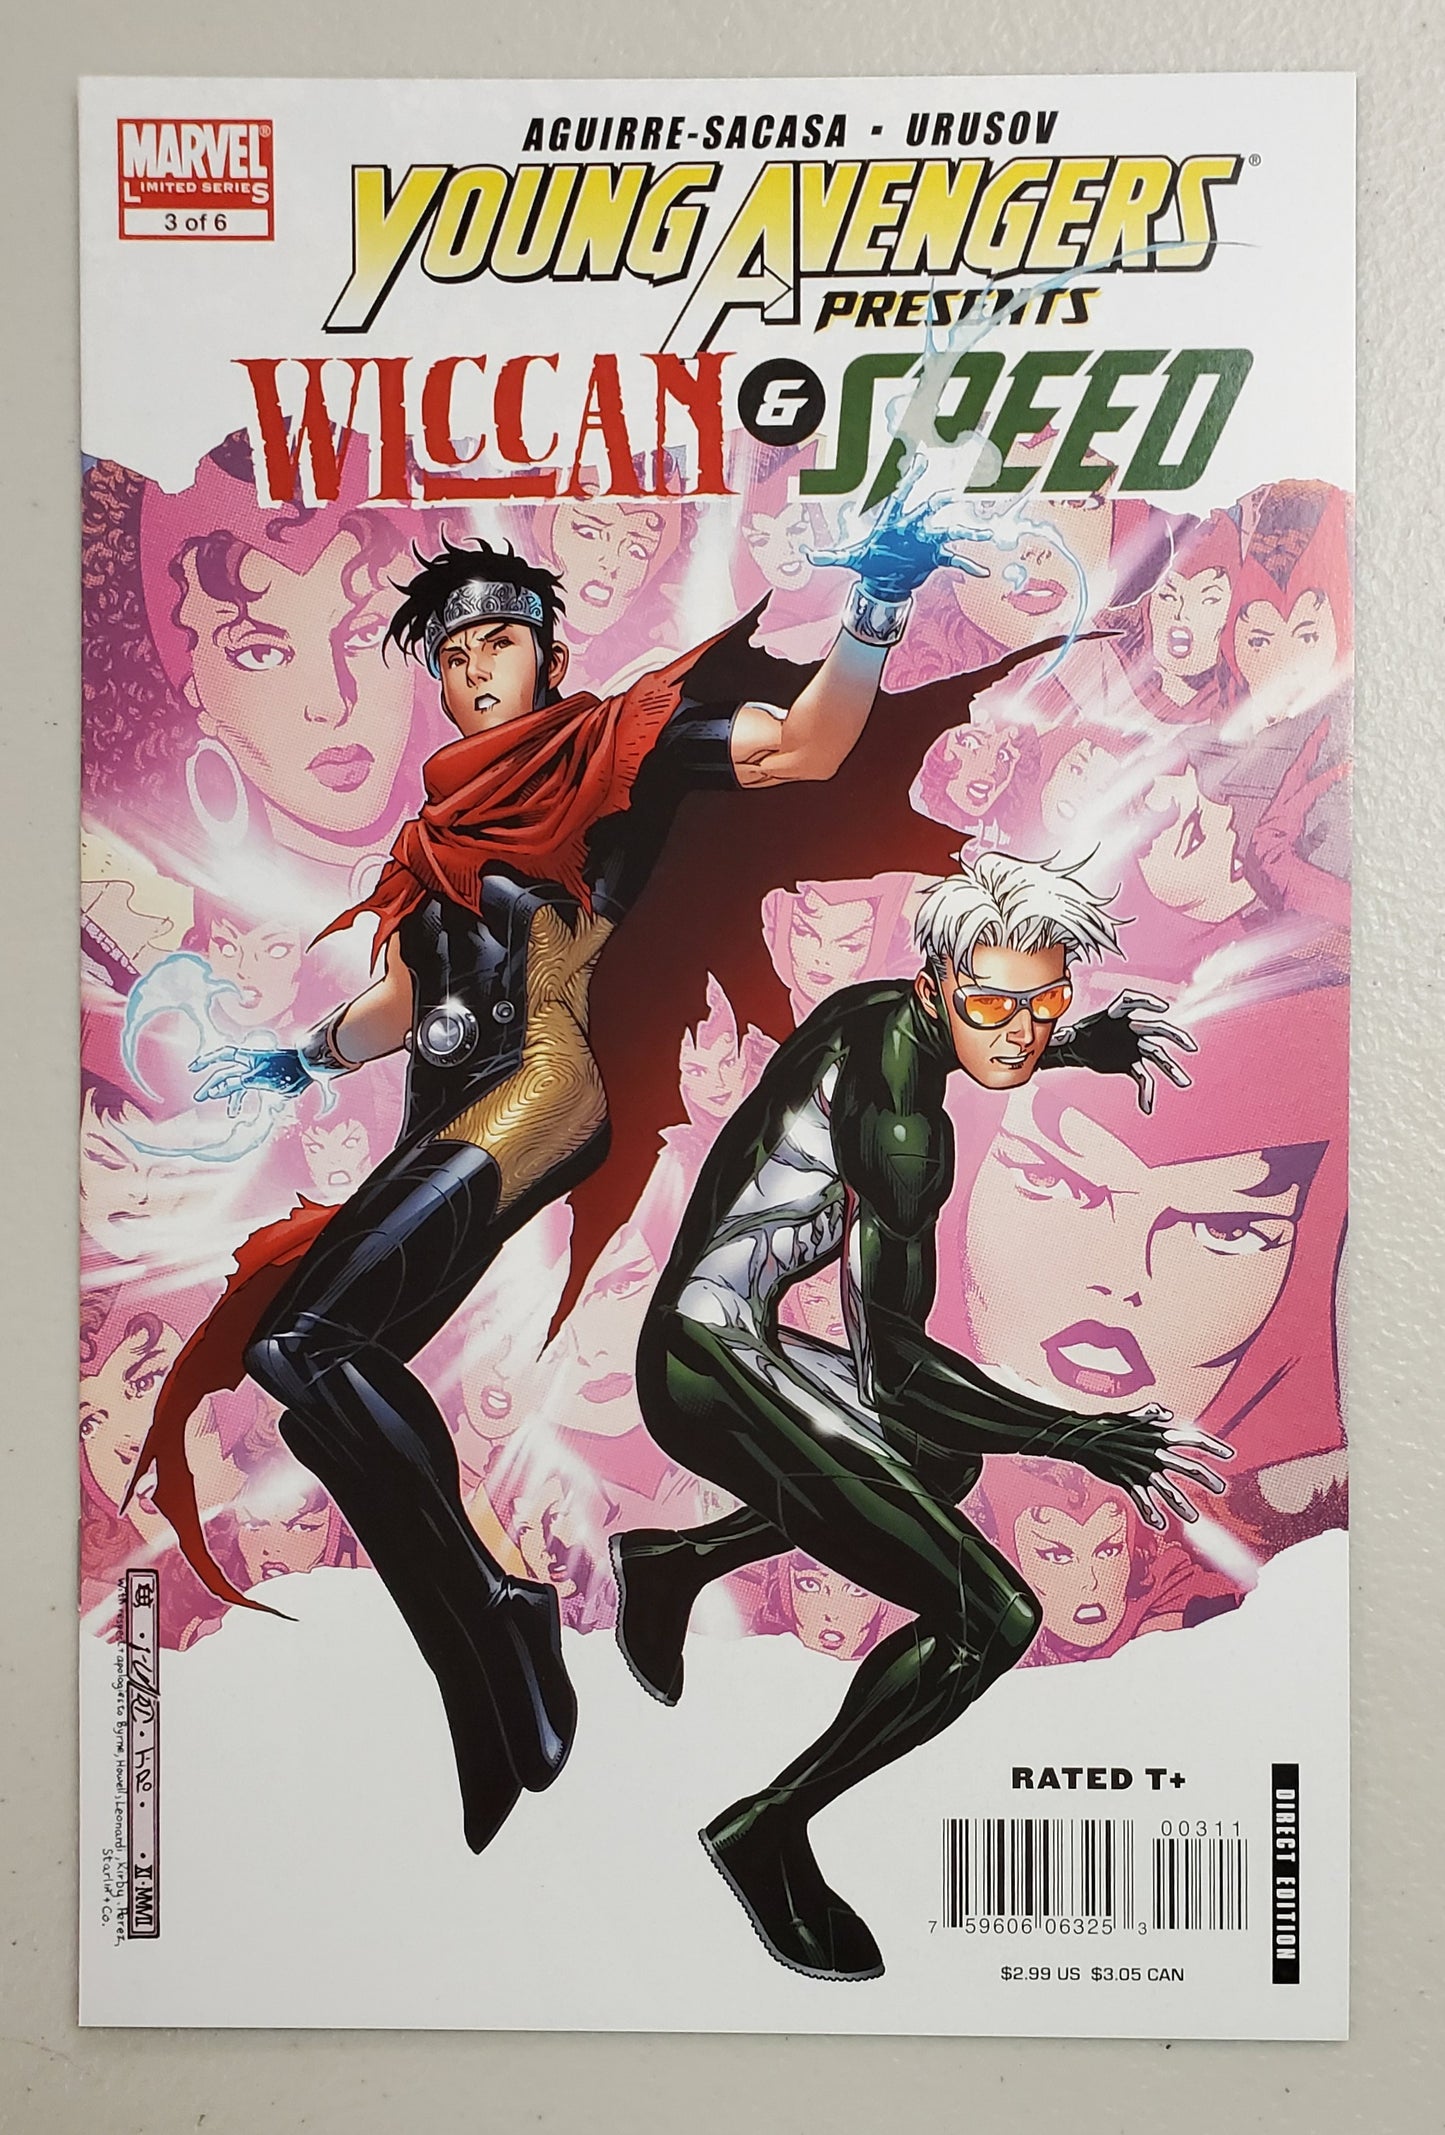 YOUNG AVENGERS PRESENTS #3 WICCAN SPEED 2008